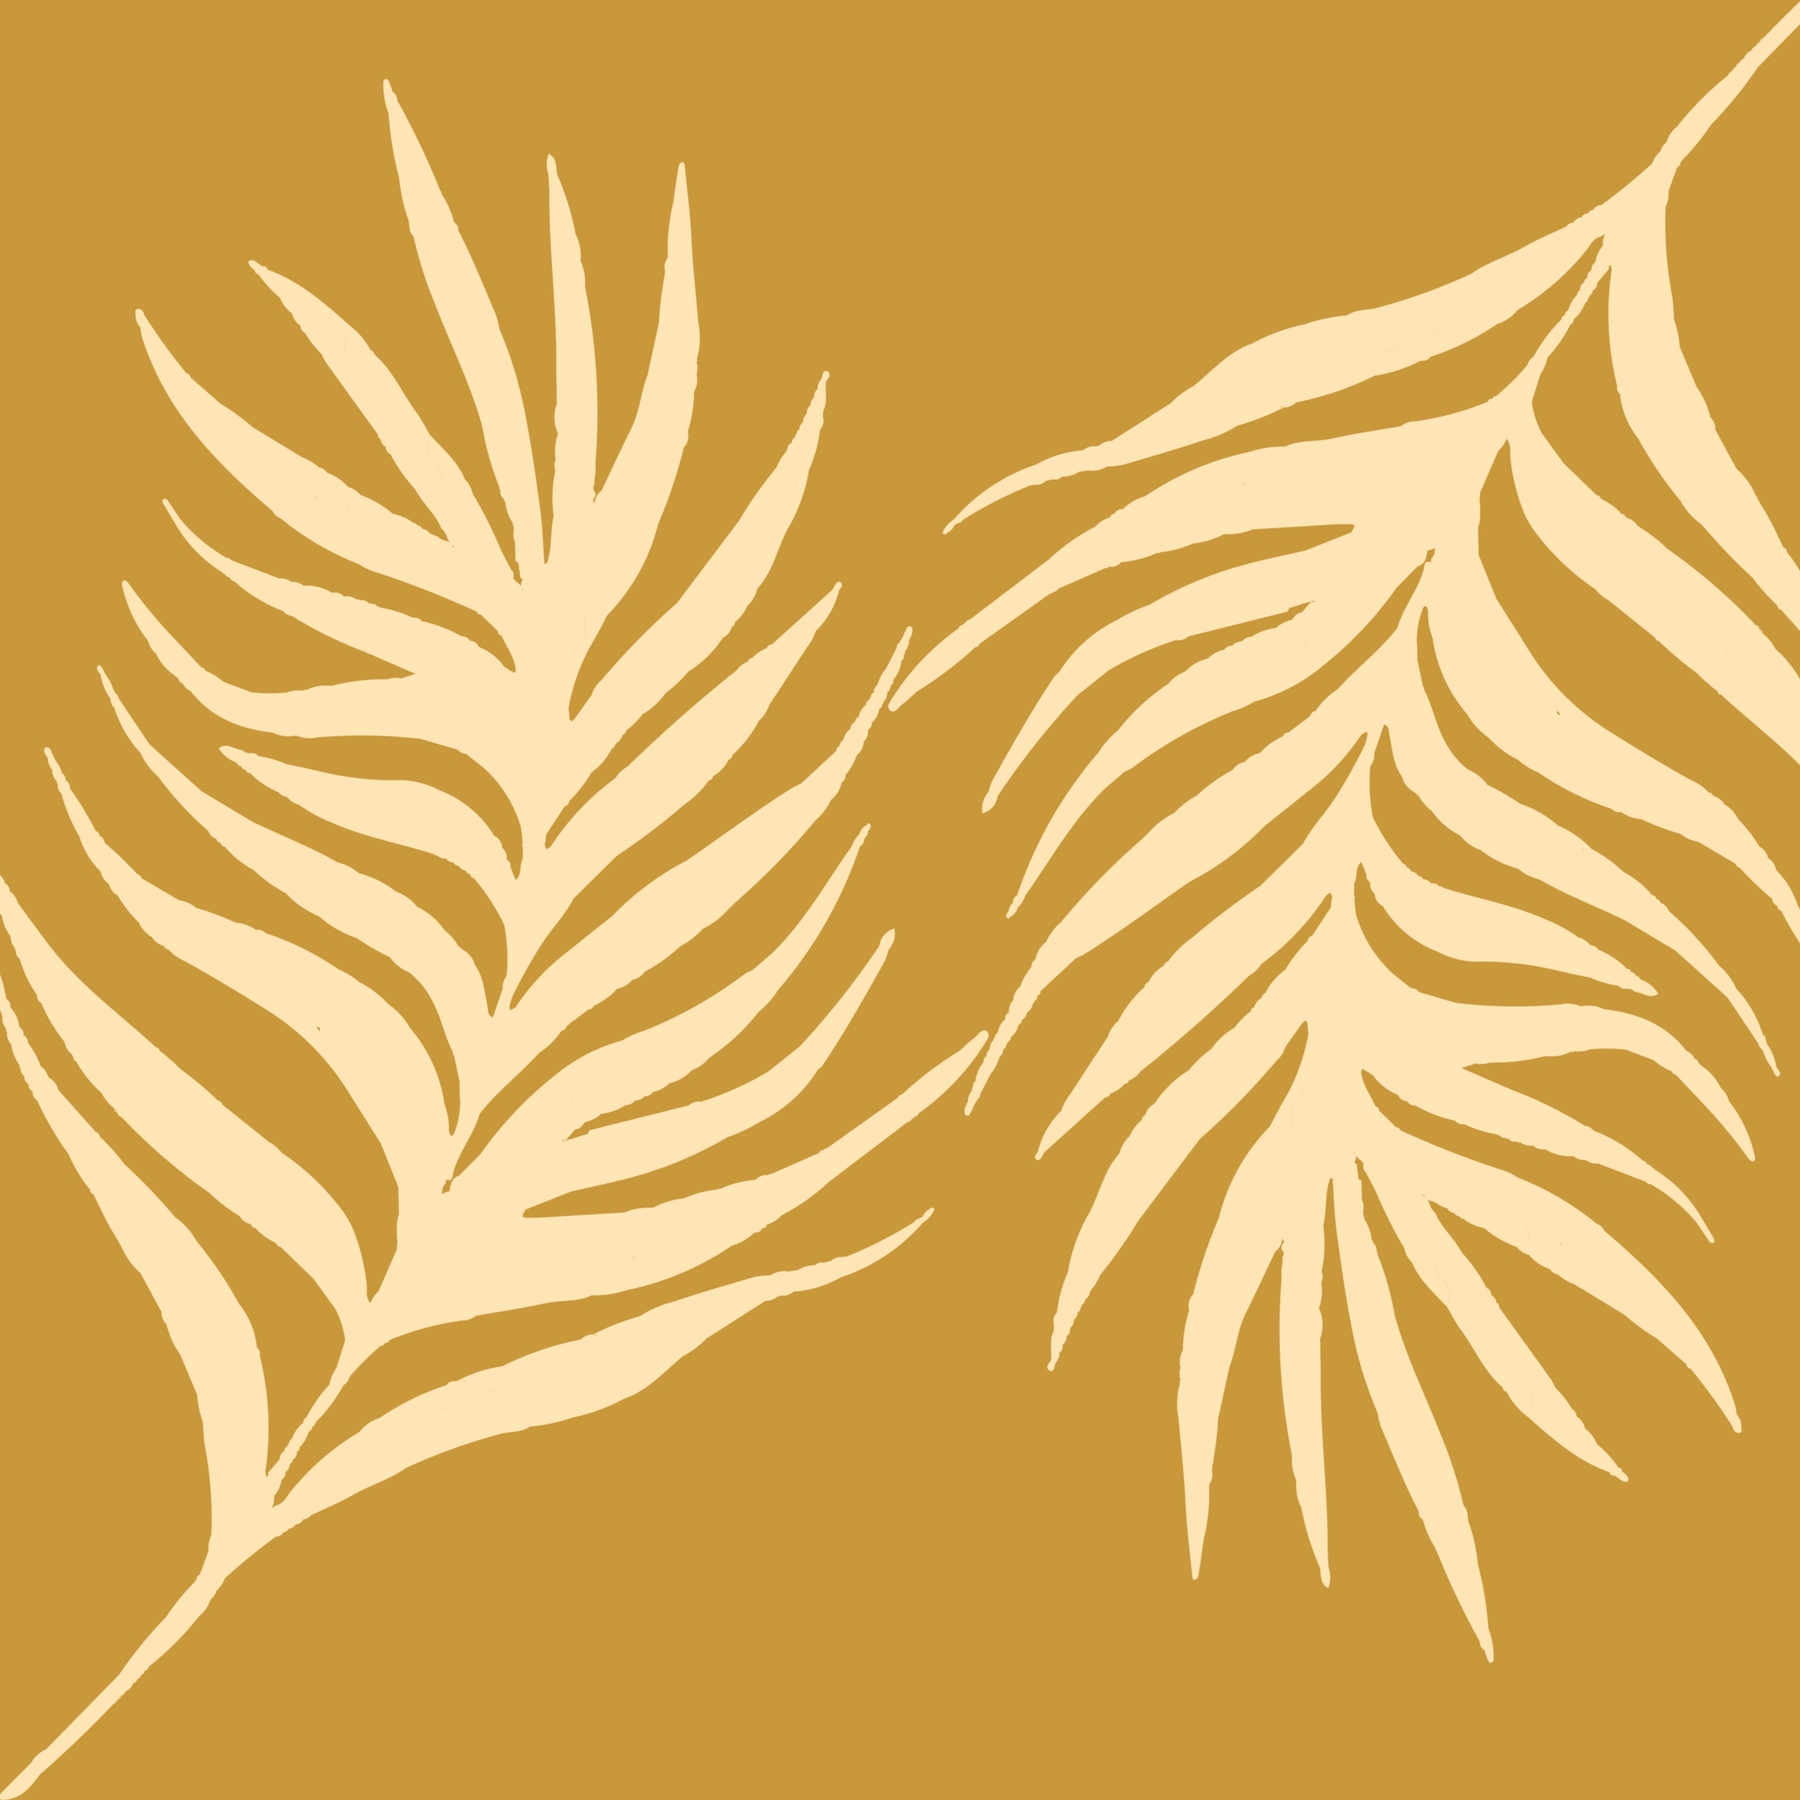 Buy Golden Palm Leaves Wallpaper wallpaper - Free shipping at Happywall